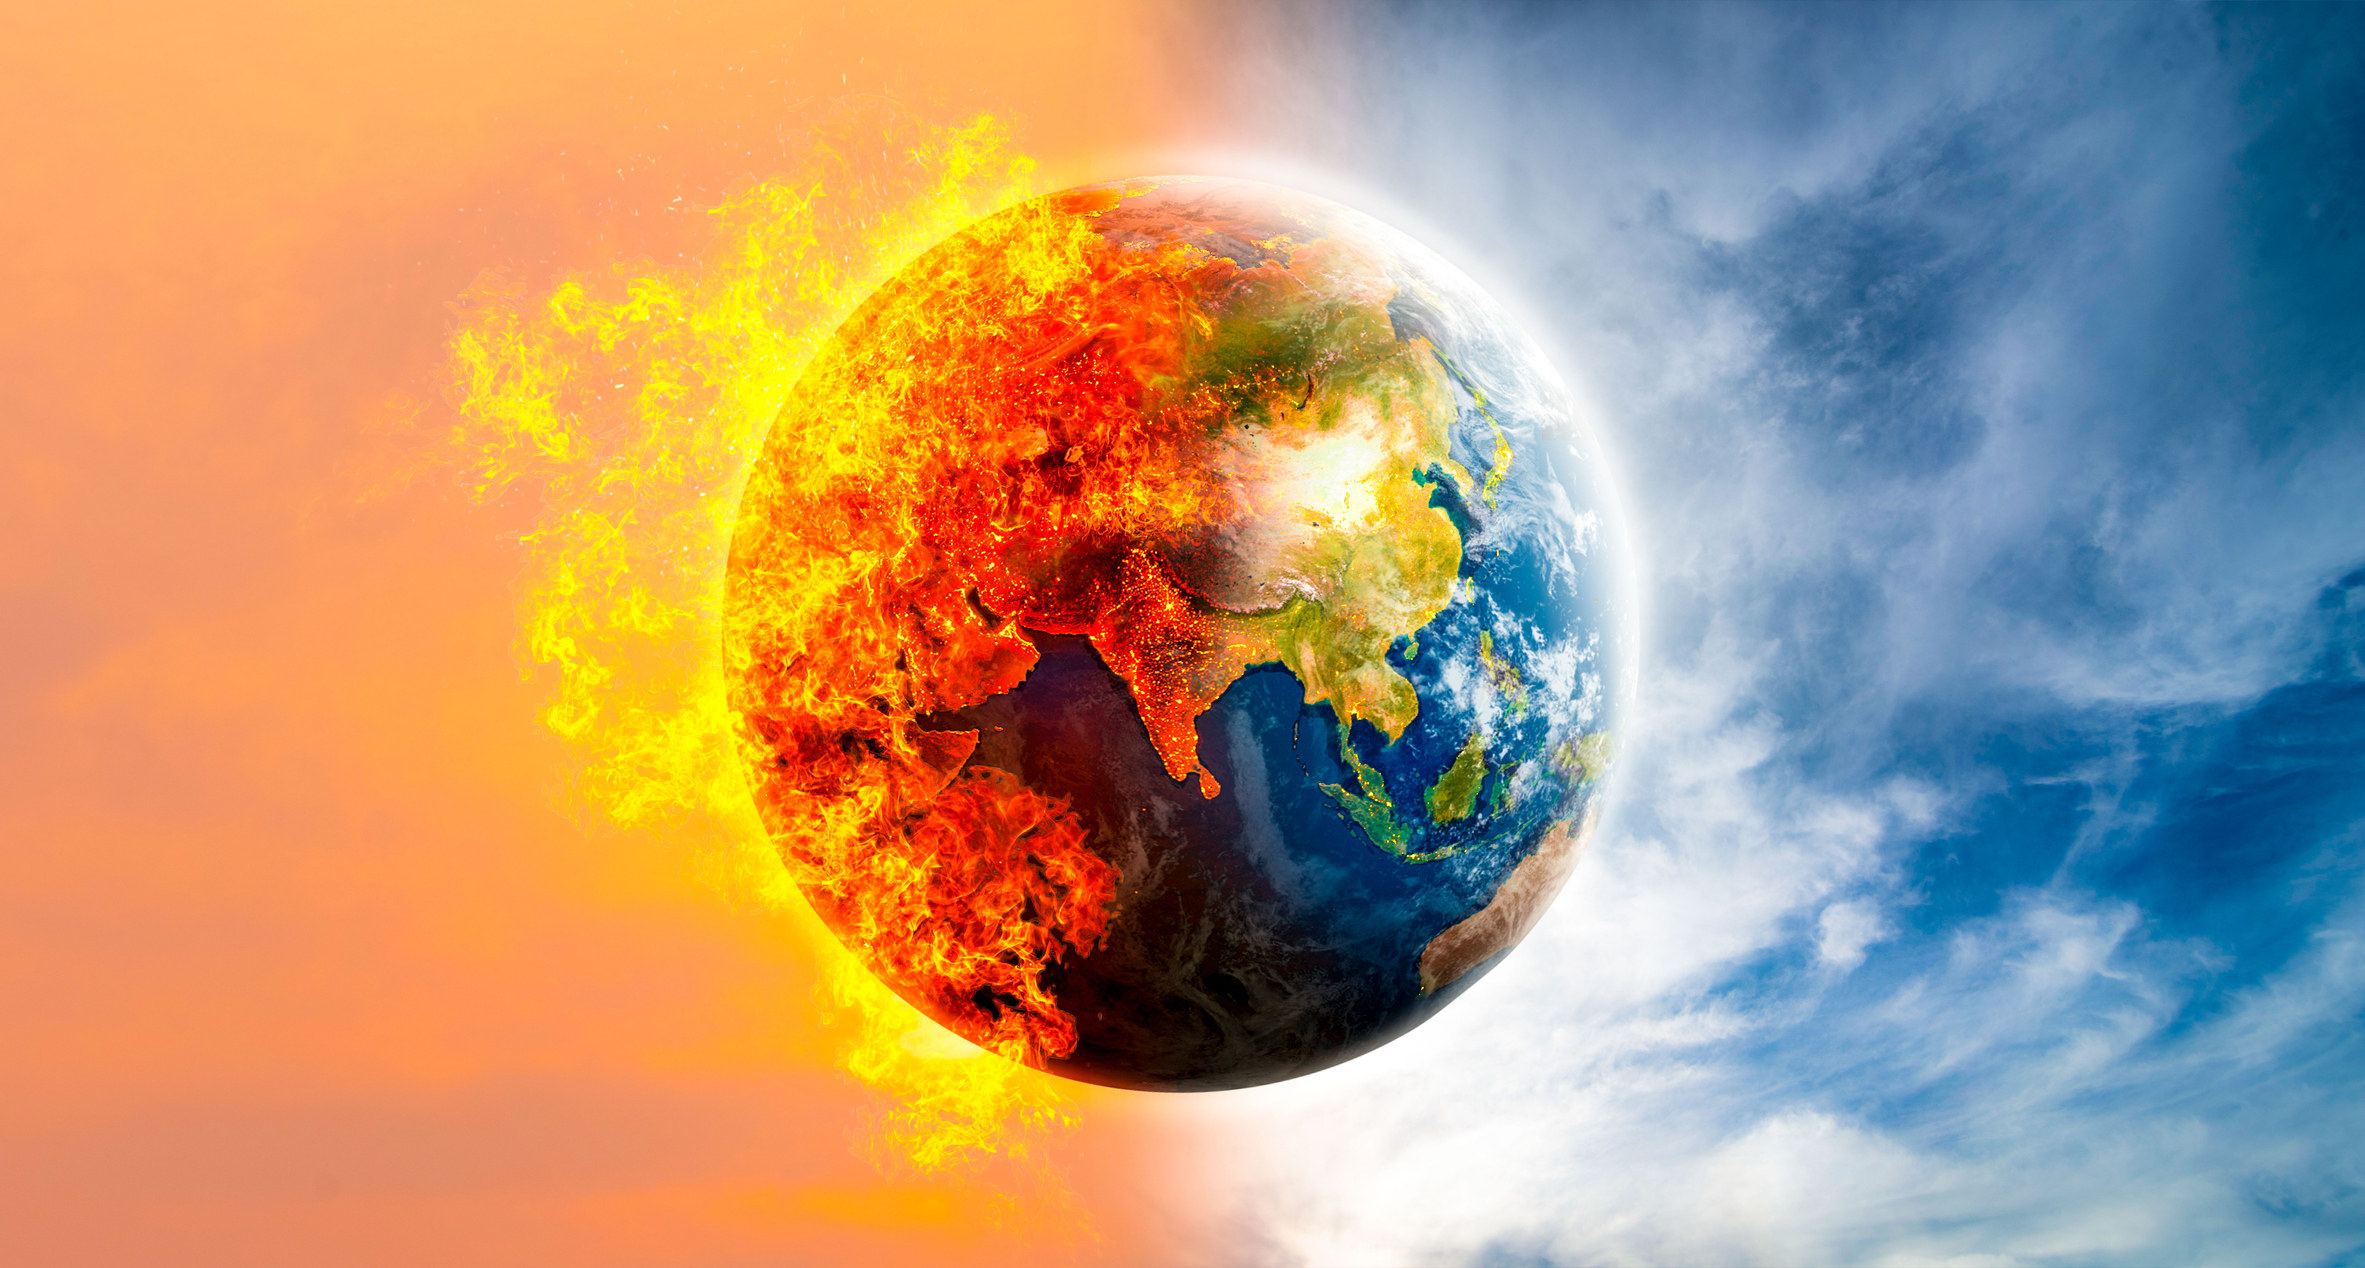 A photo illustration of half the earth in flames